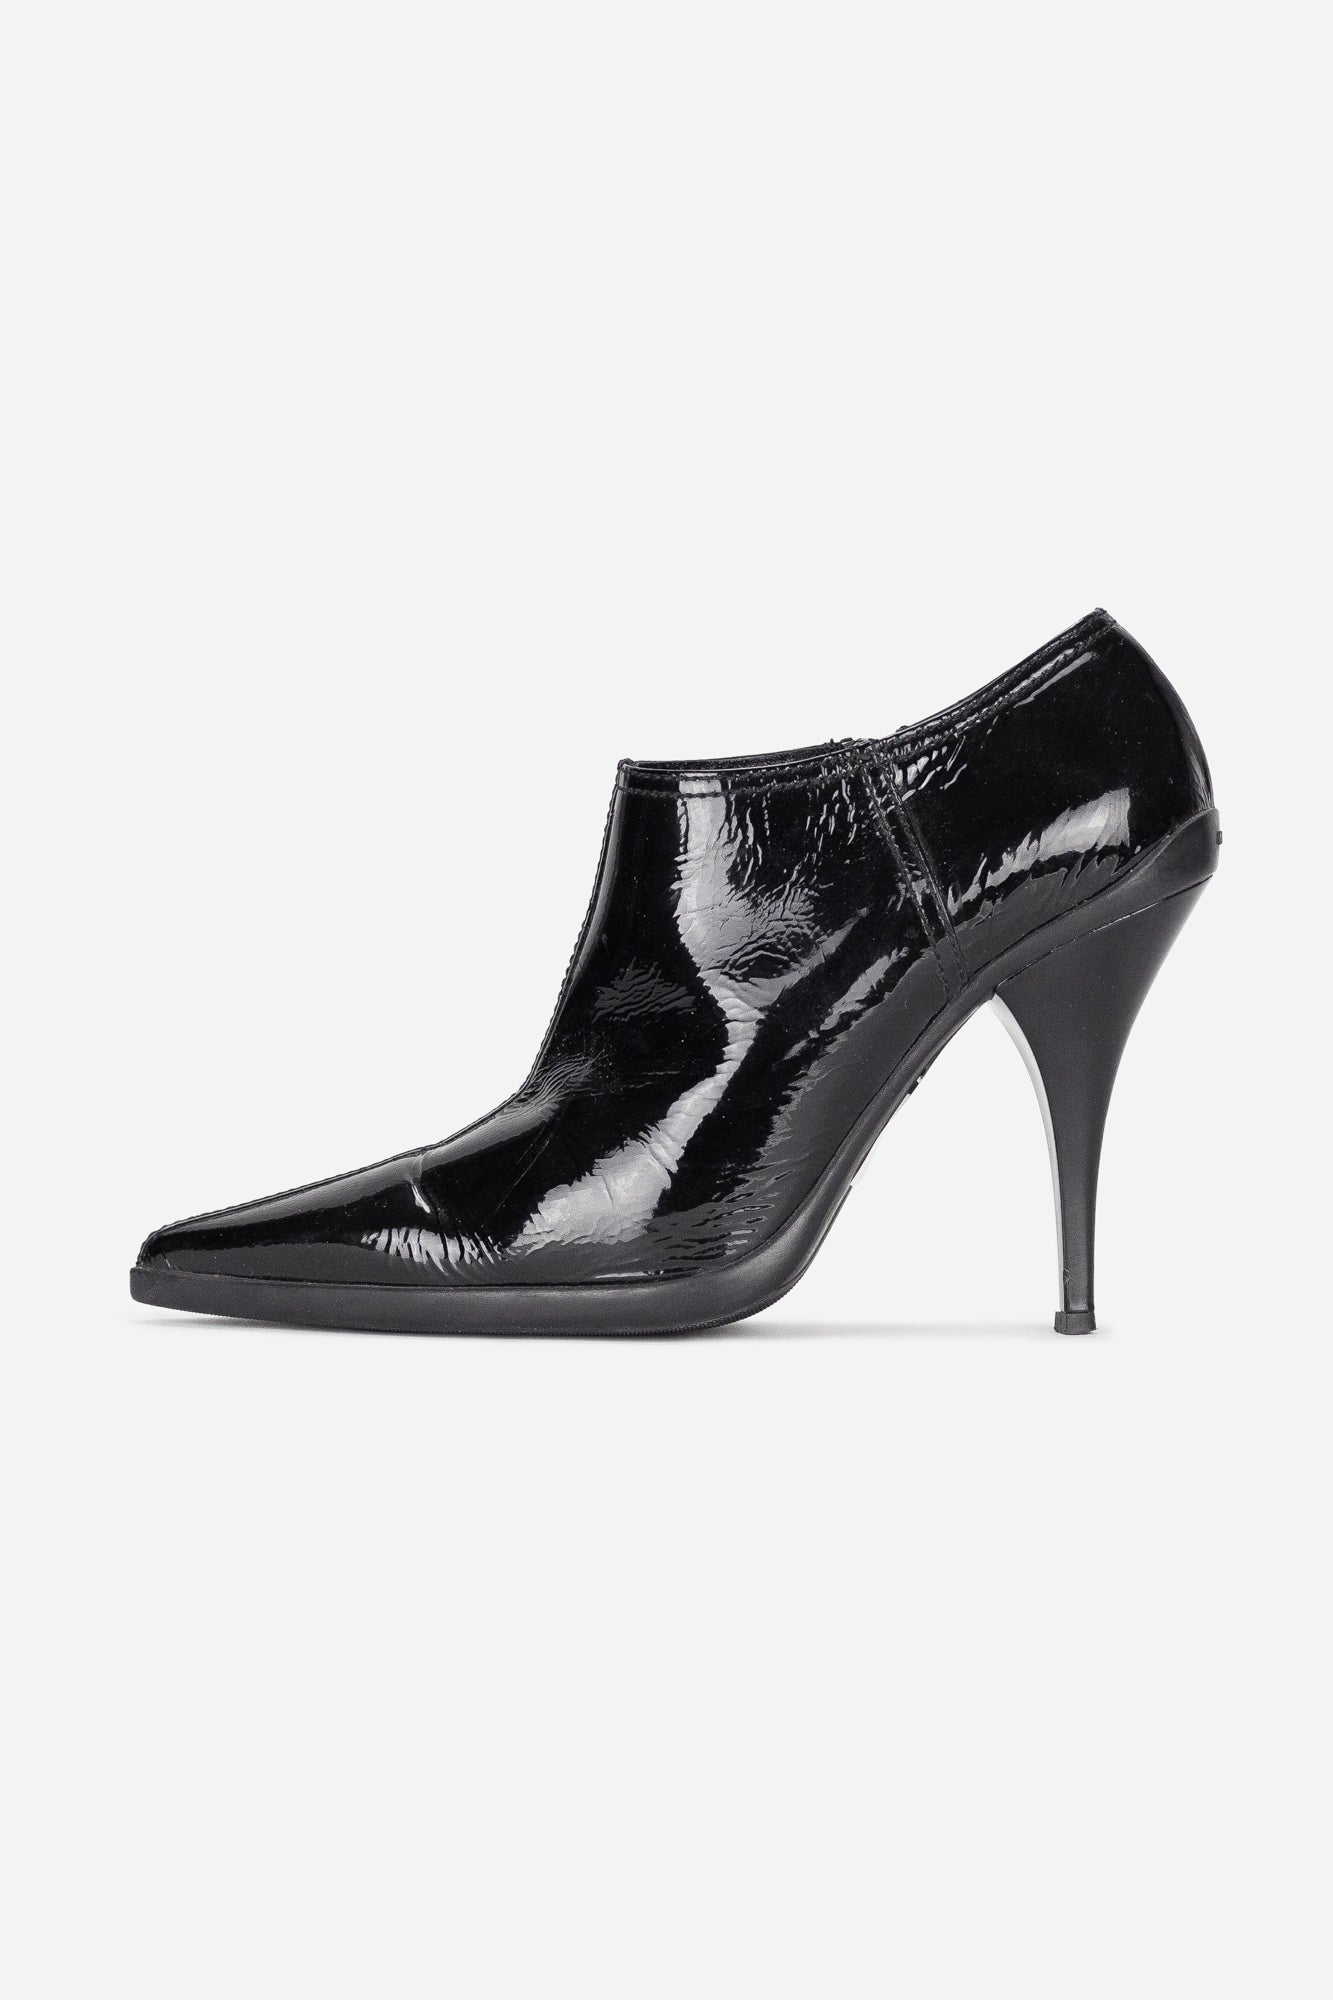 Black Patent Leather Pointed Toe Booties